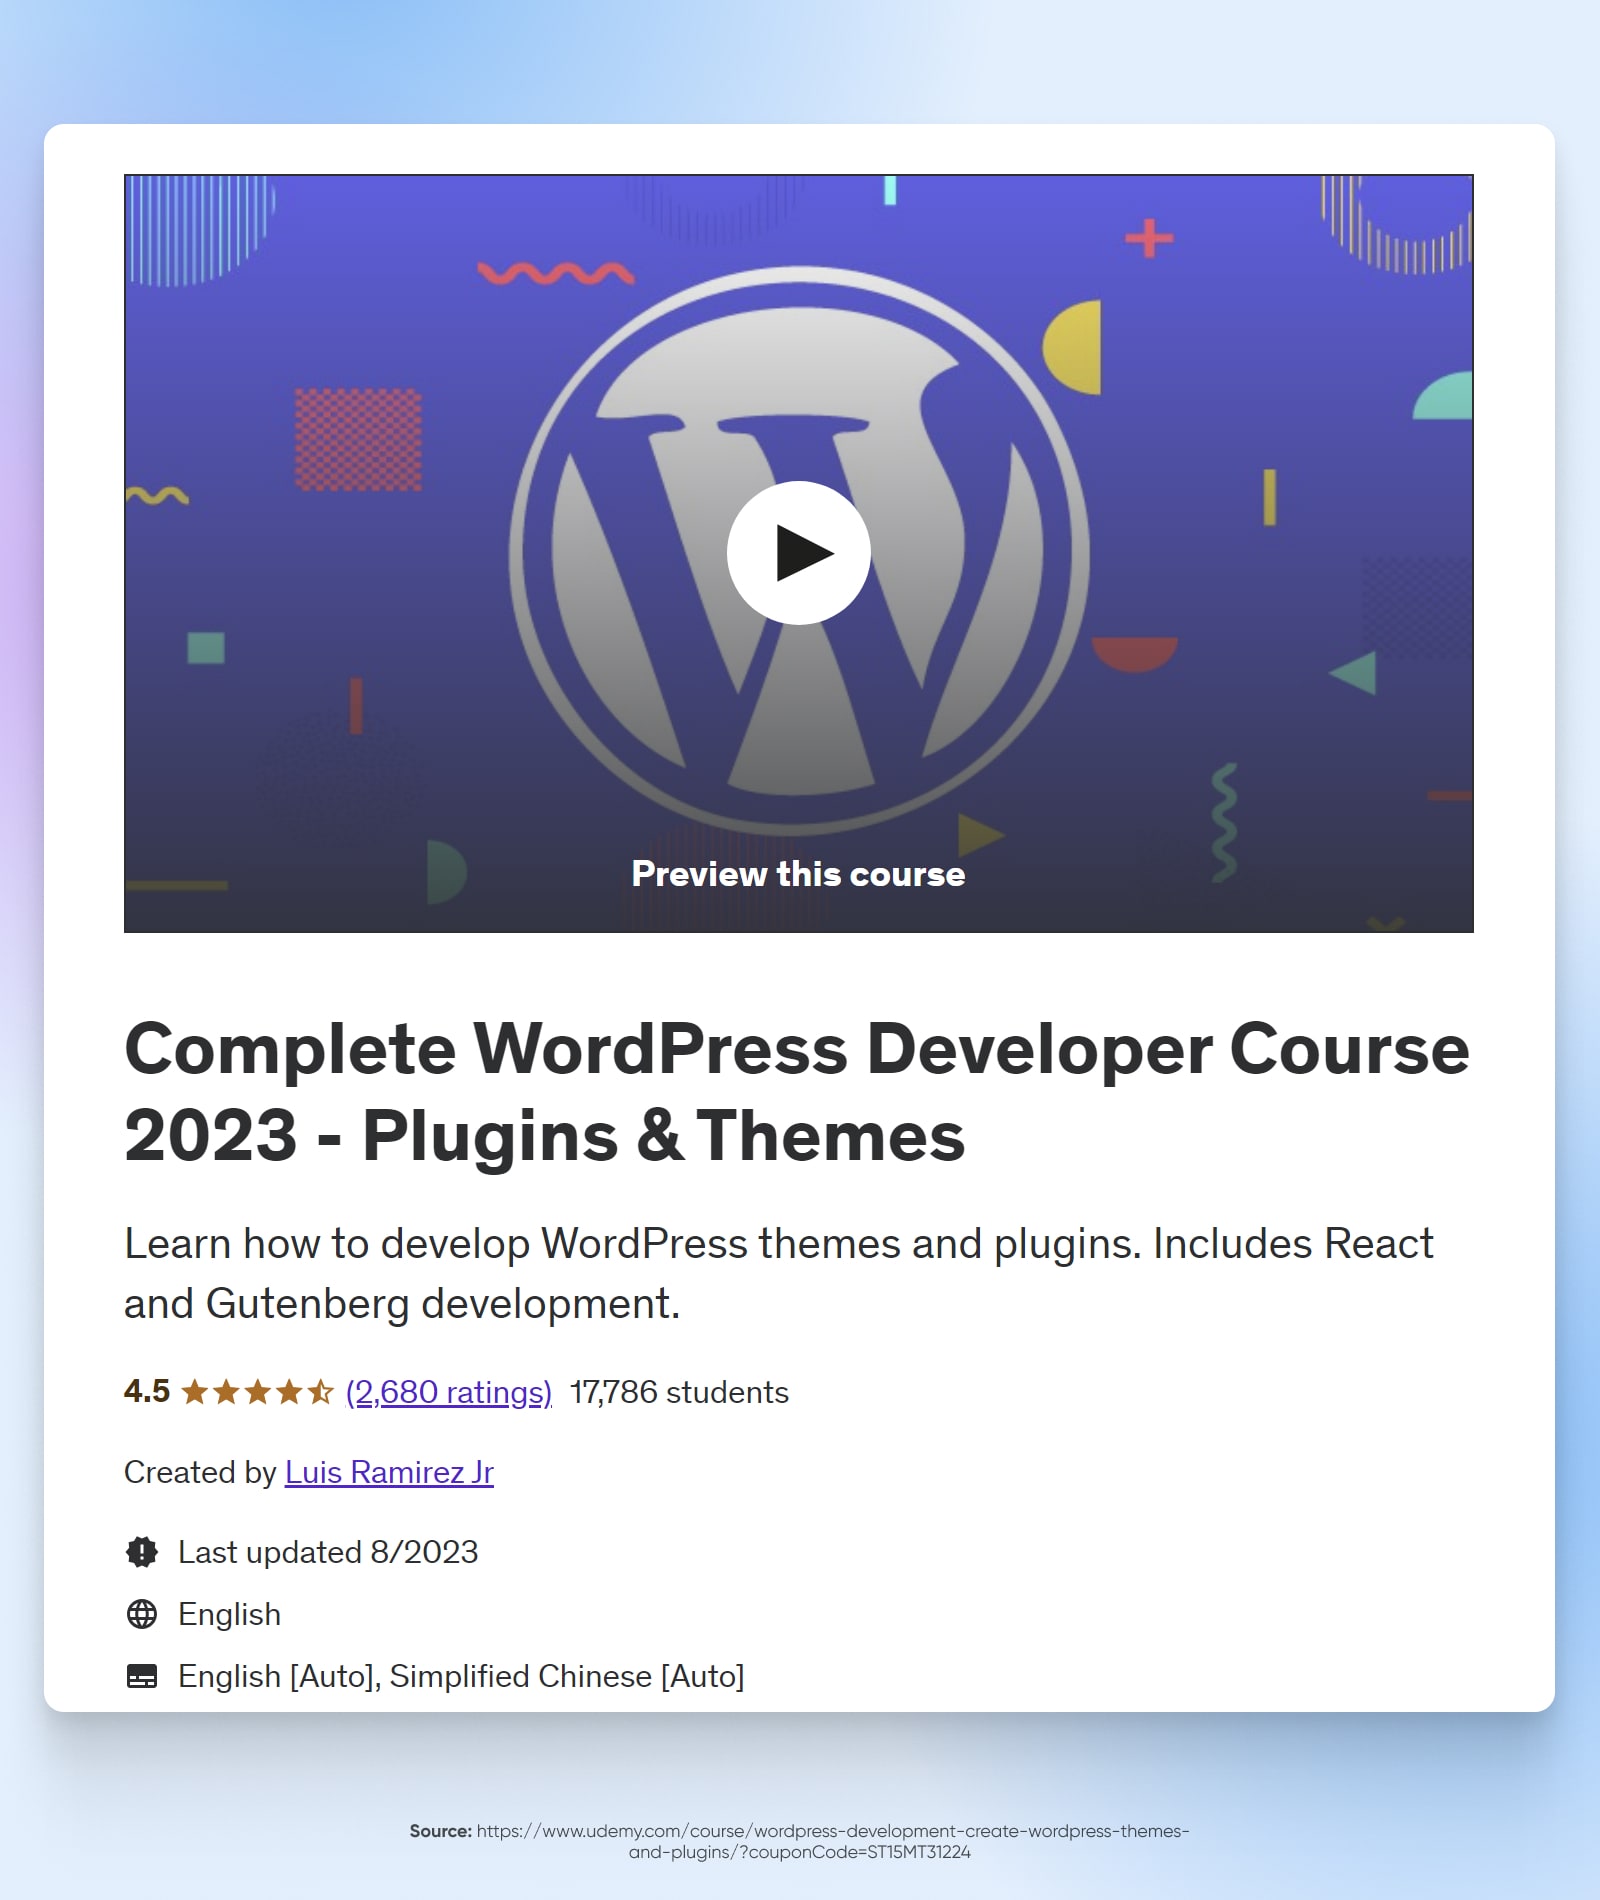 screenshot of the WP developer course on Udemy